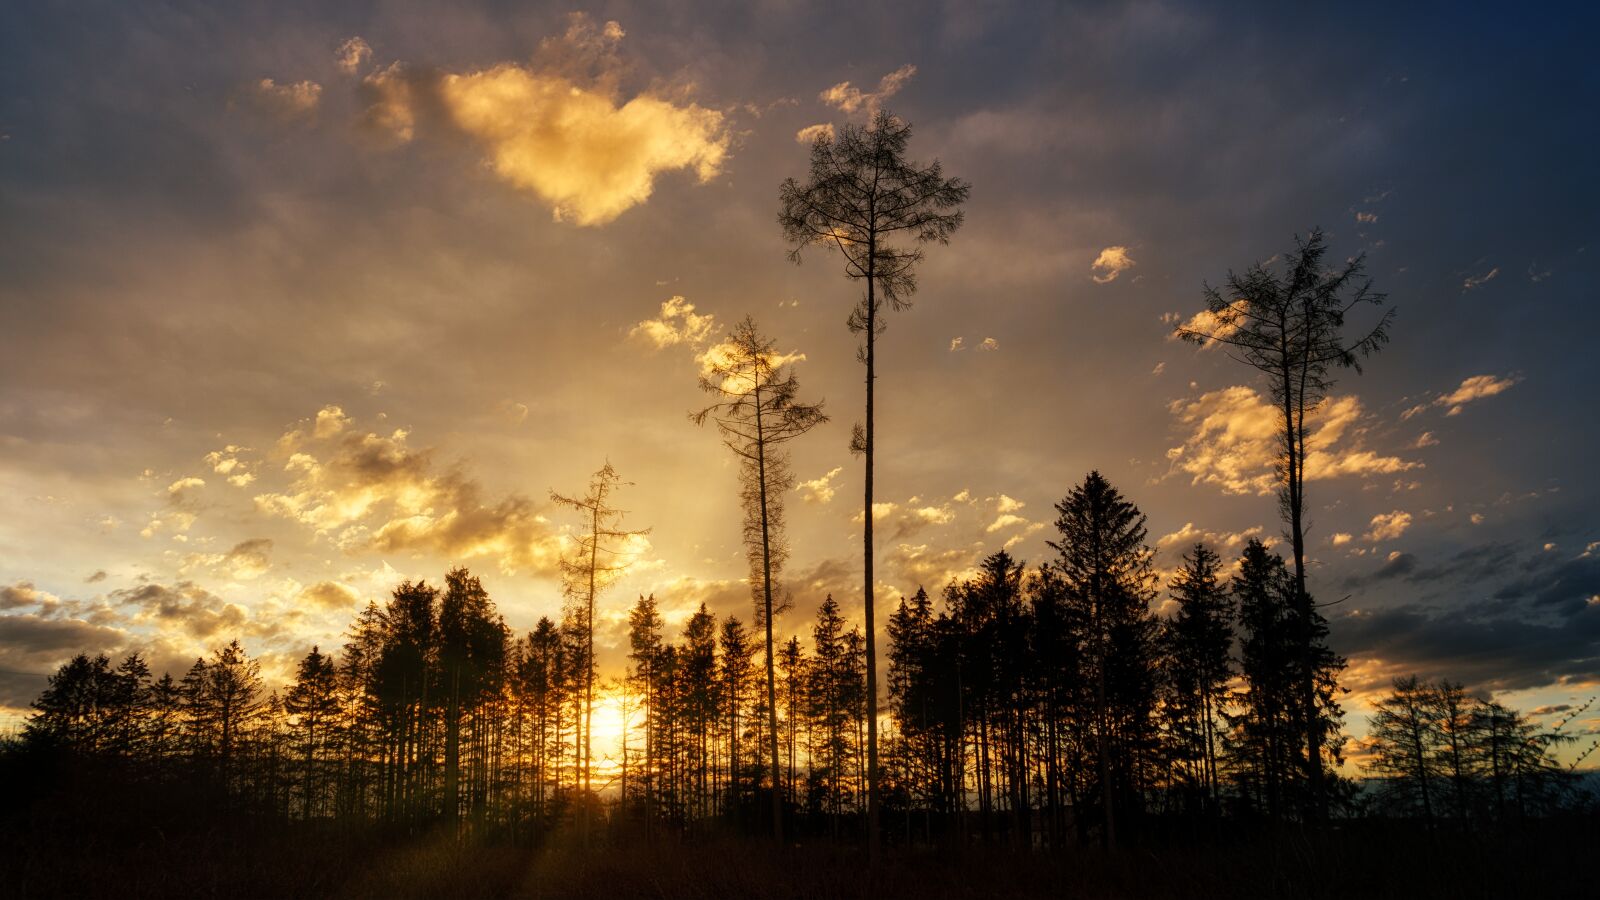 Sony a7 II sample photo. Sunset, trees, forest photography